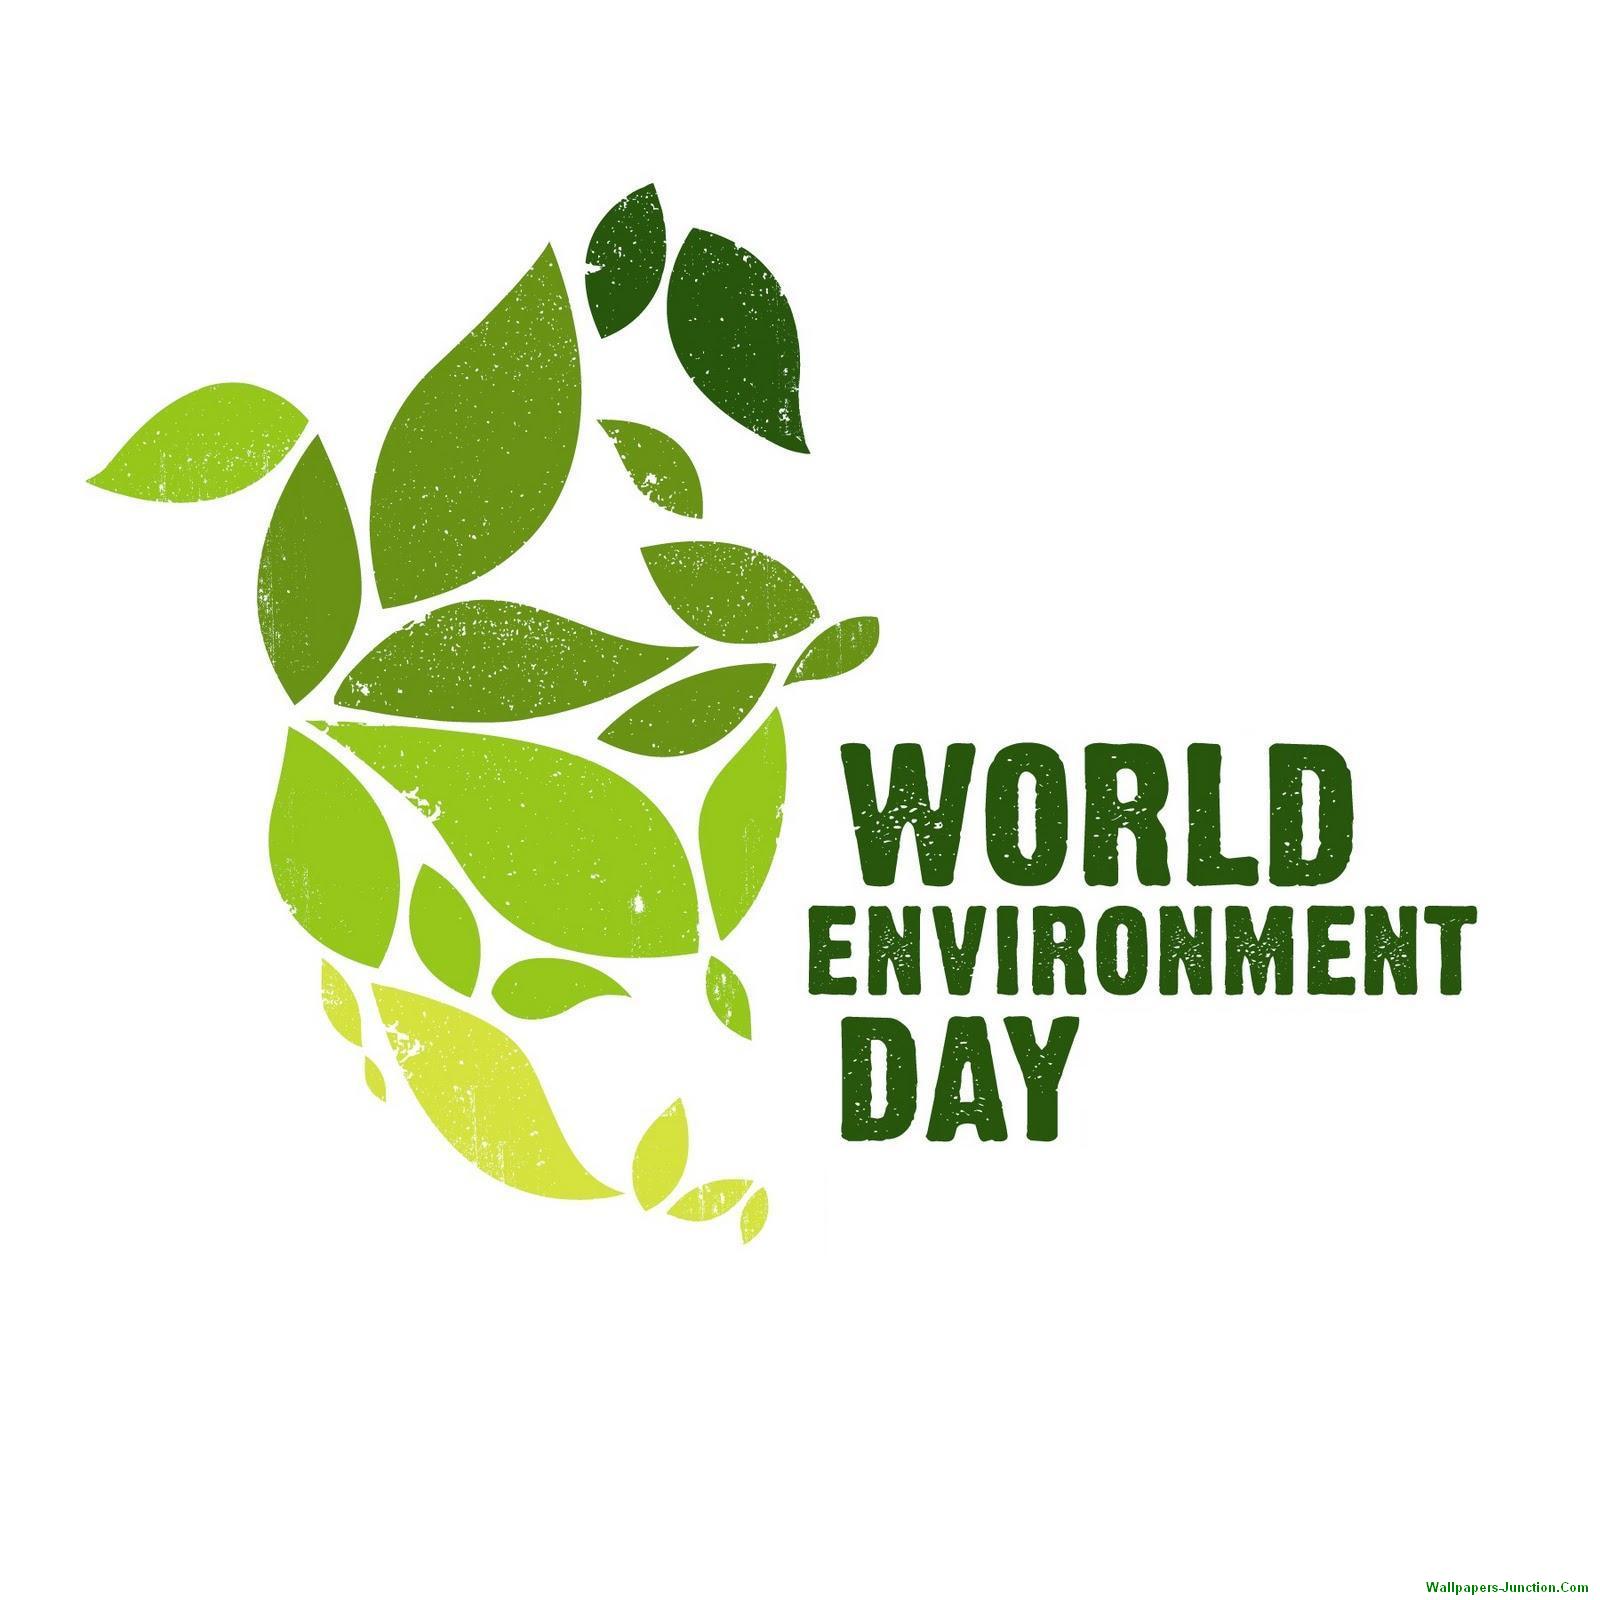 Happy World Environment Day 2017 Image, Picture, Photo